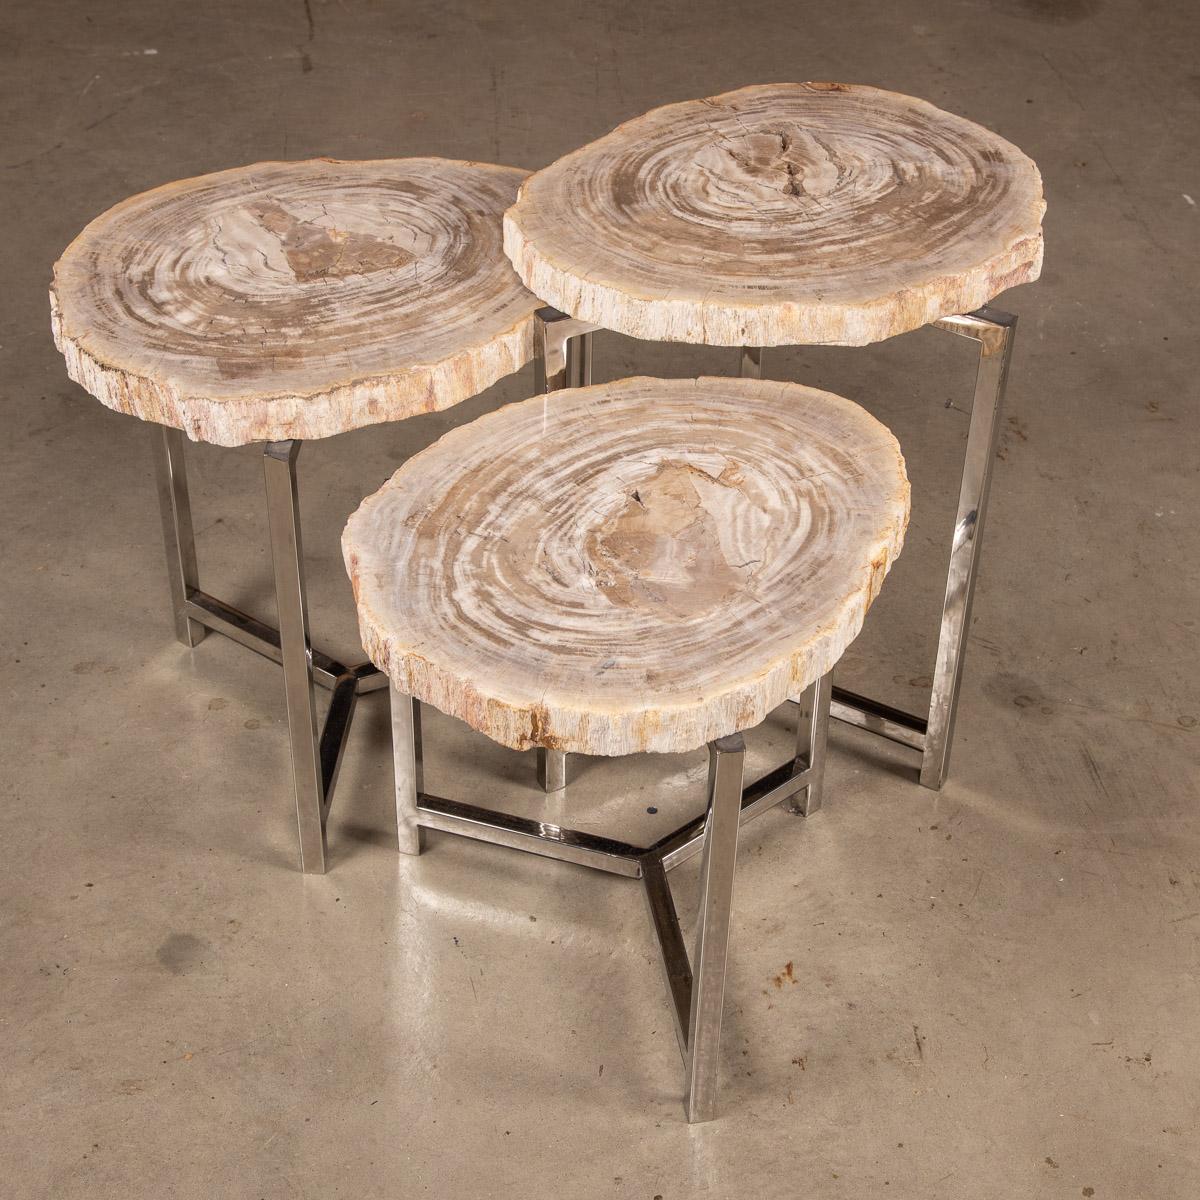 fossil tables